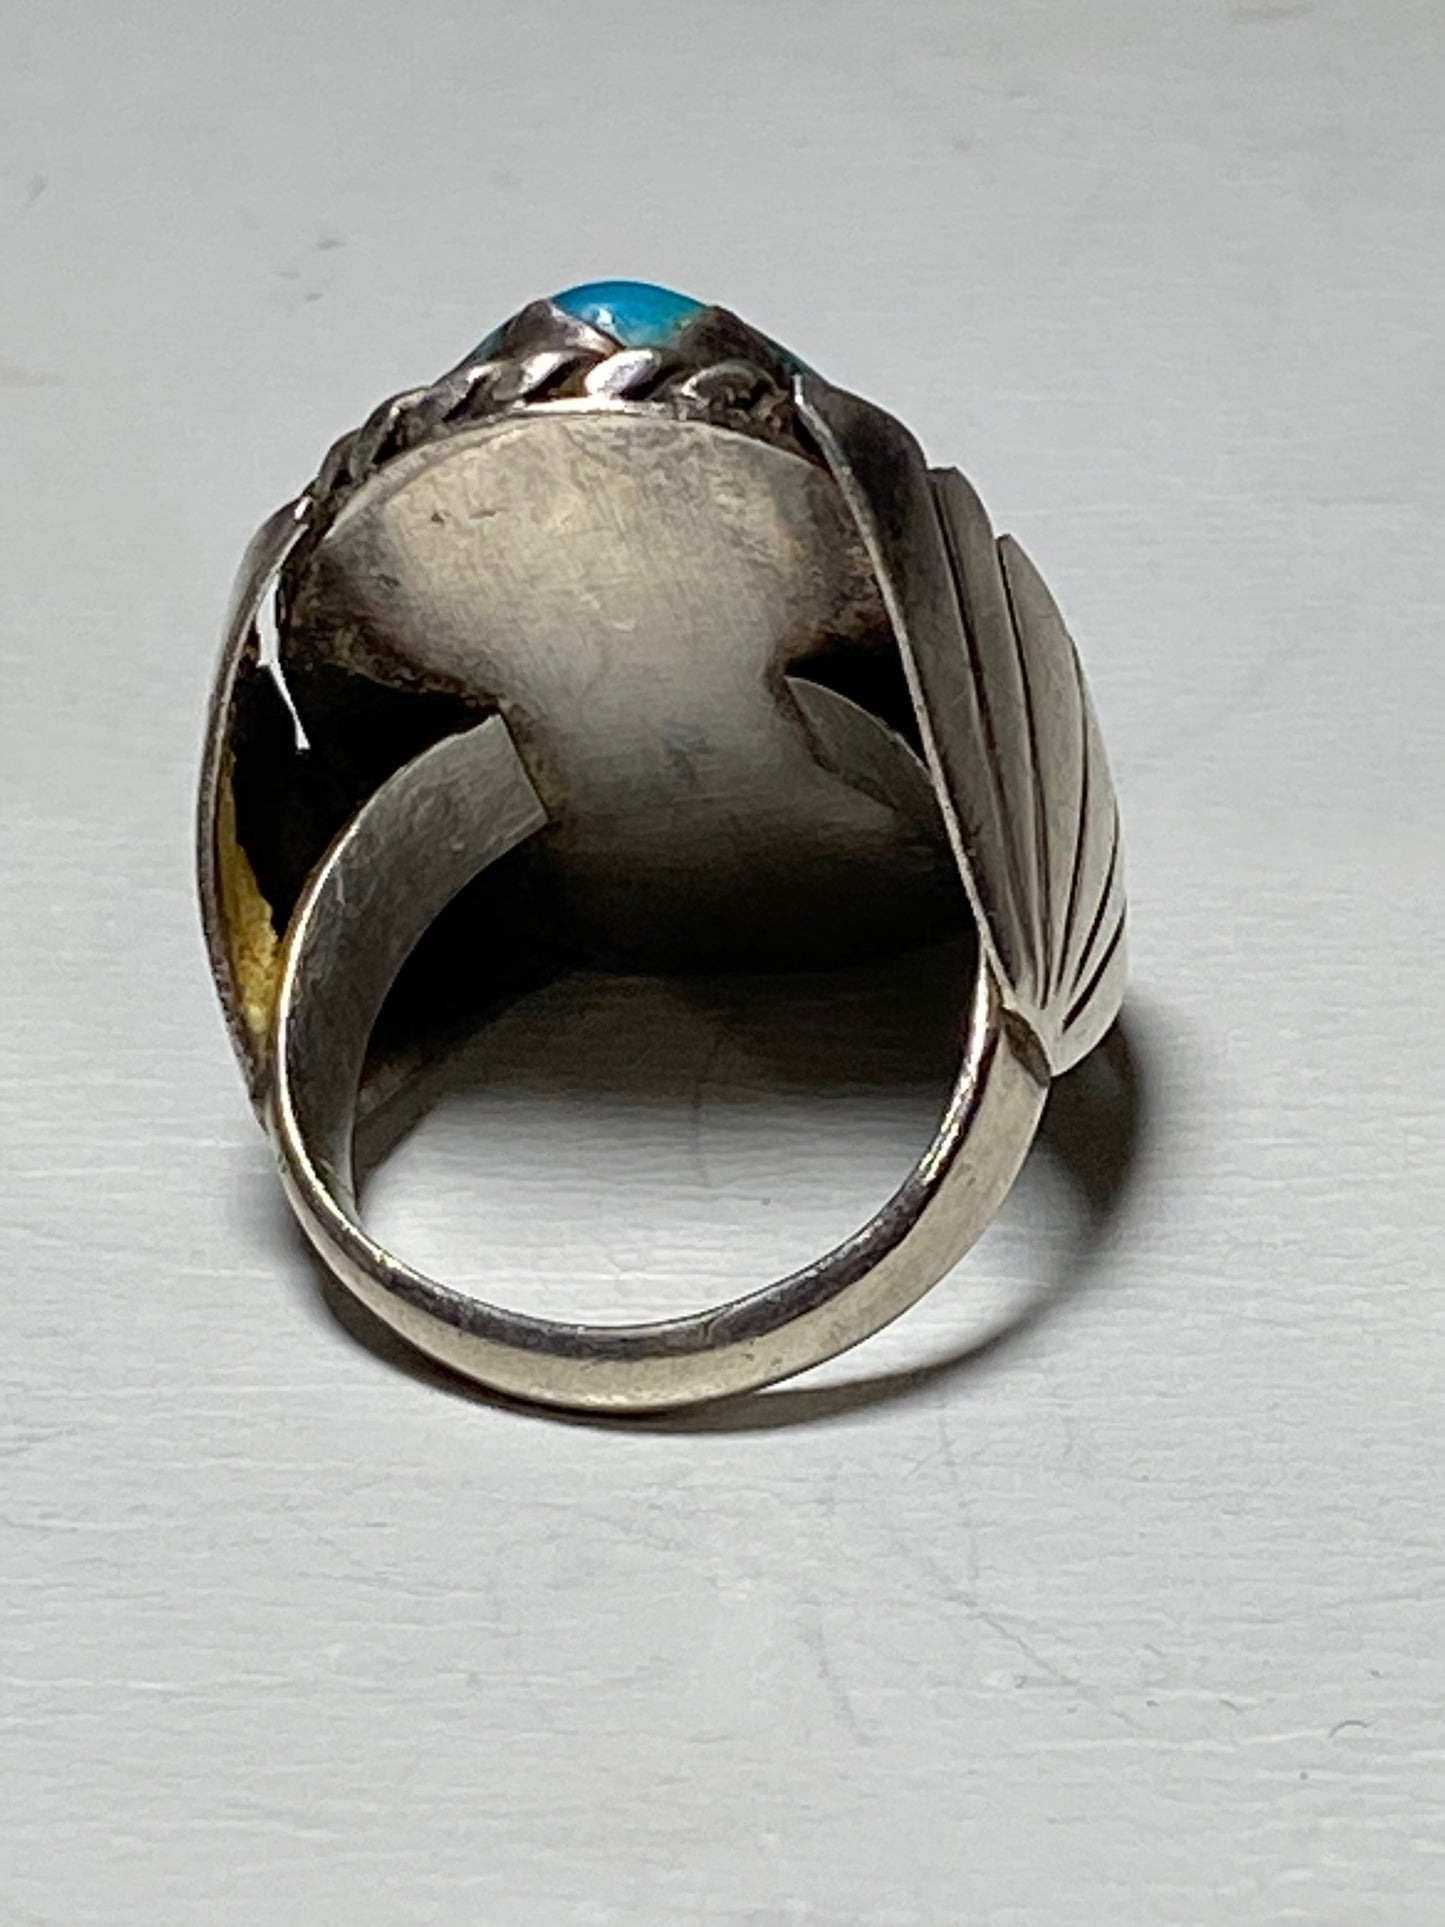 Turquoise ring Navajo southwest tribal sterling silver women